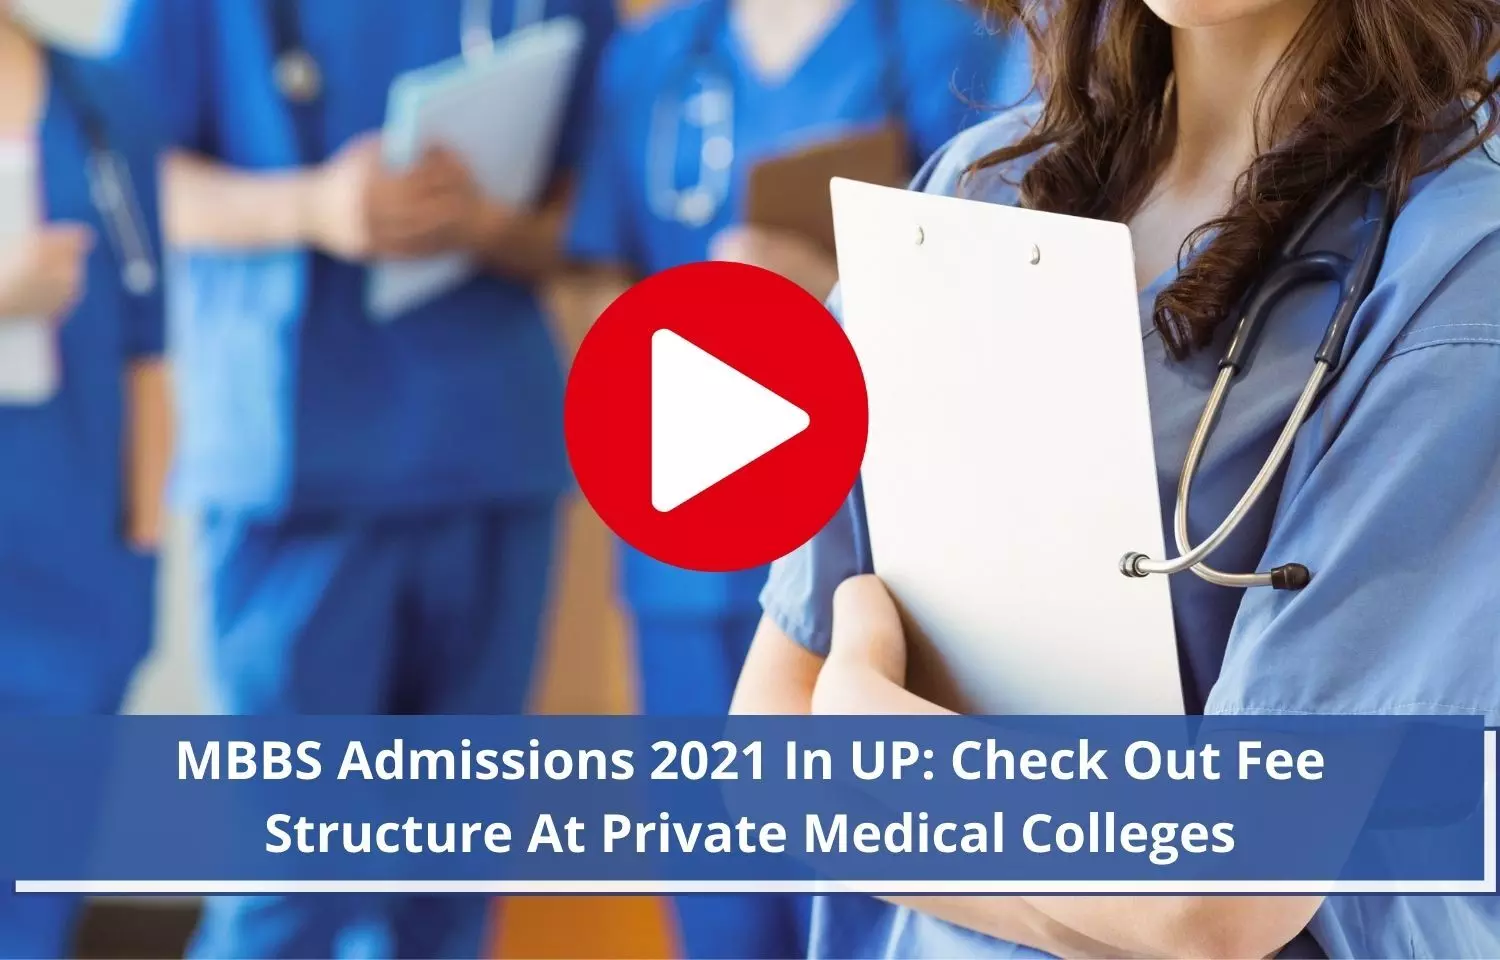 UP DGME releases MBBS fee structure for Private Medical Colleges, Details